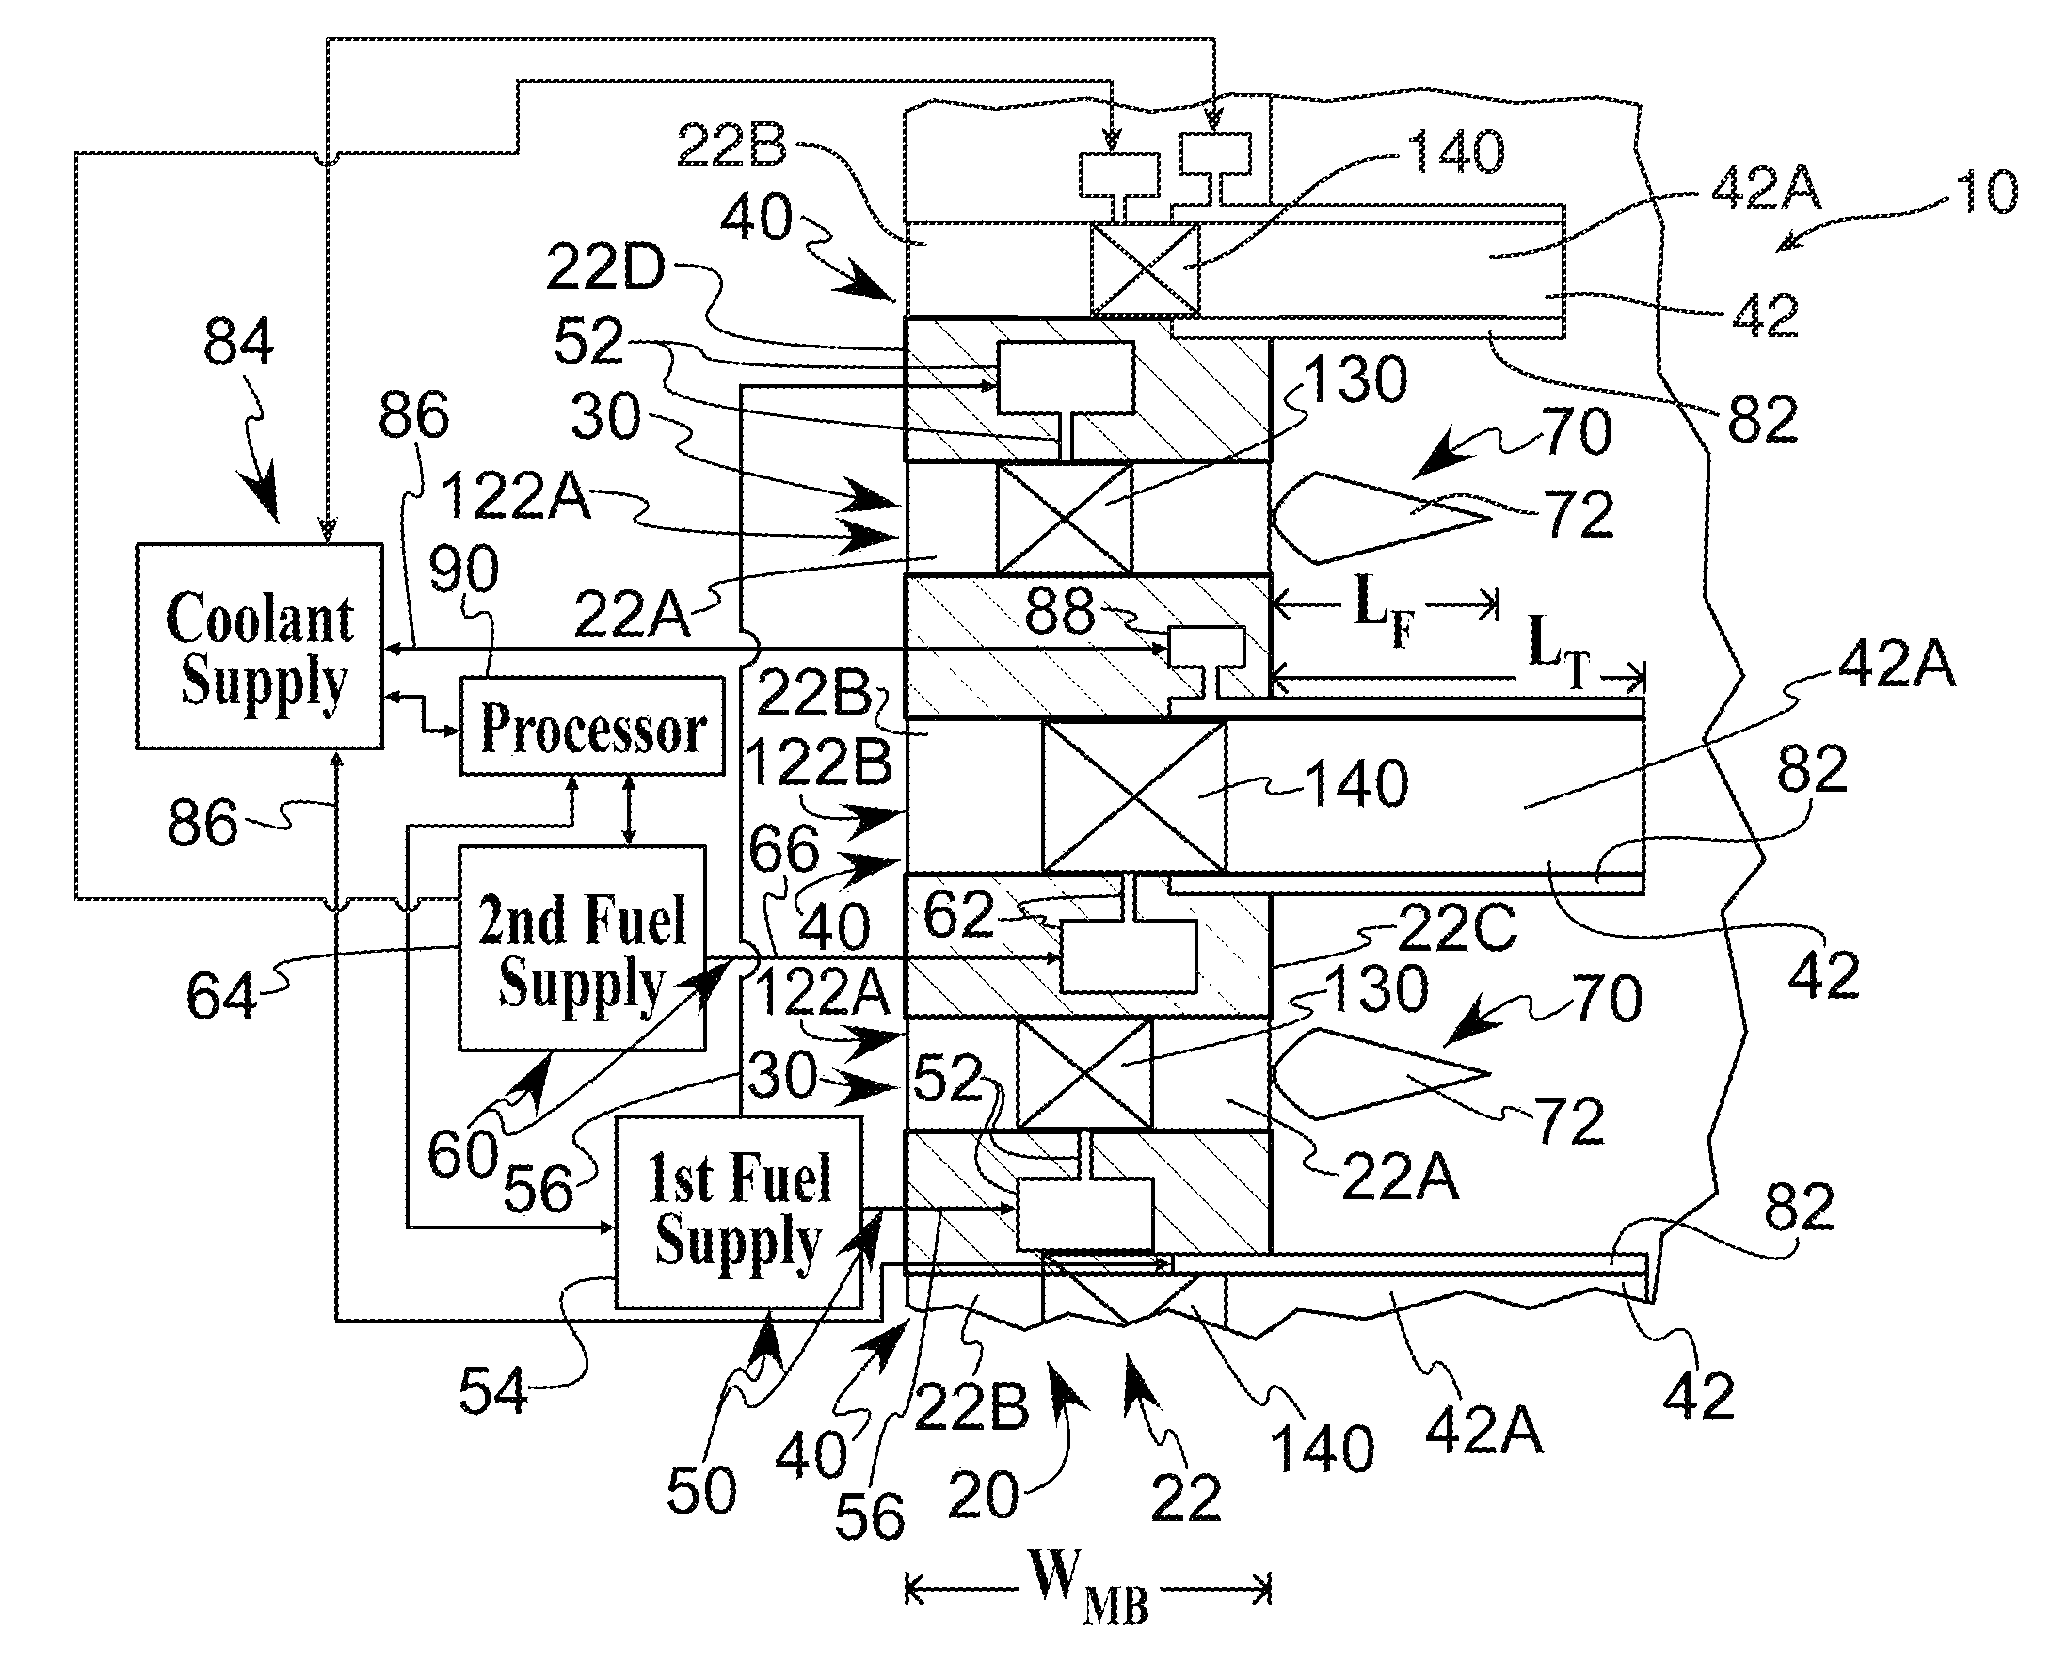 Axially staged combustion system for a gas turbine engine